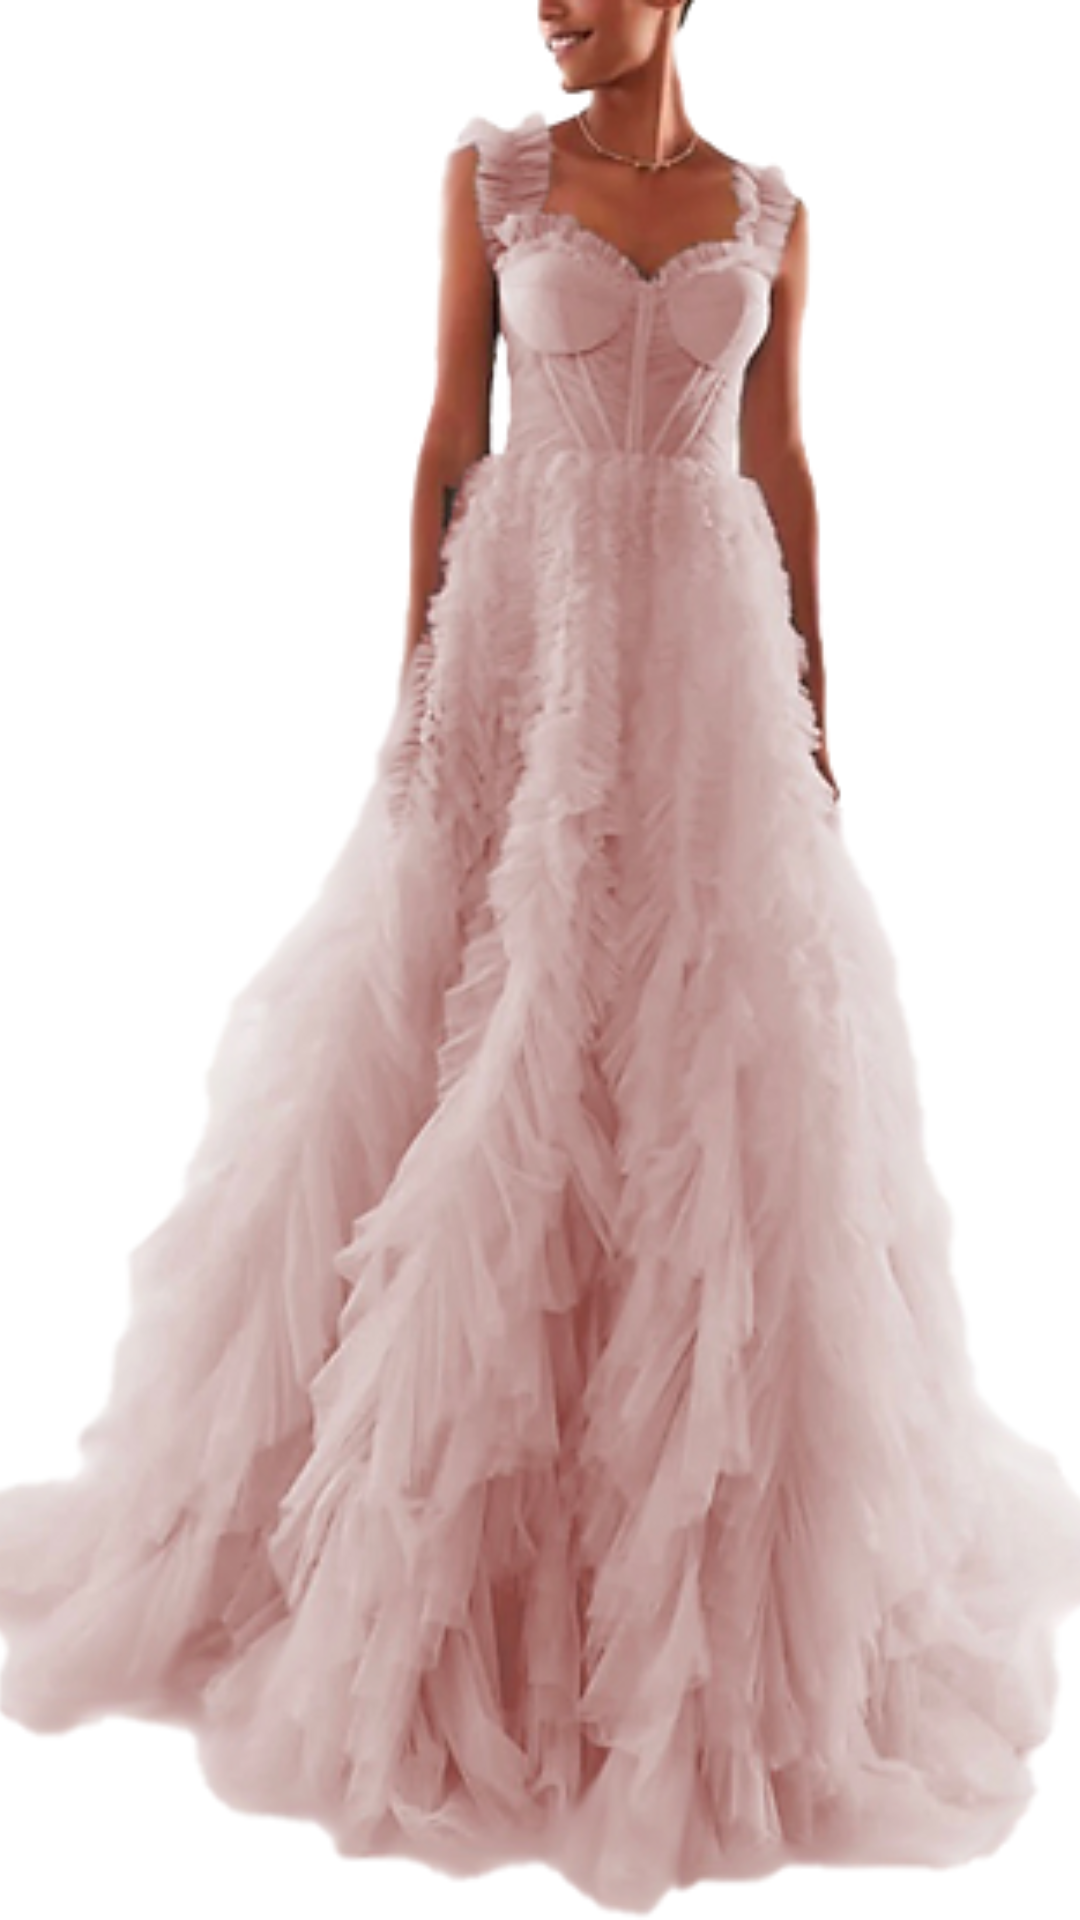 Milla Coral Ruffled Tulle Dress in Pink